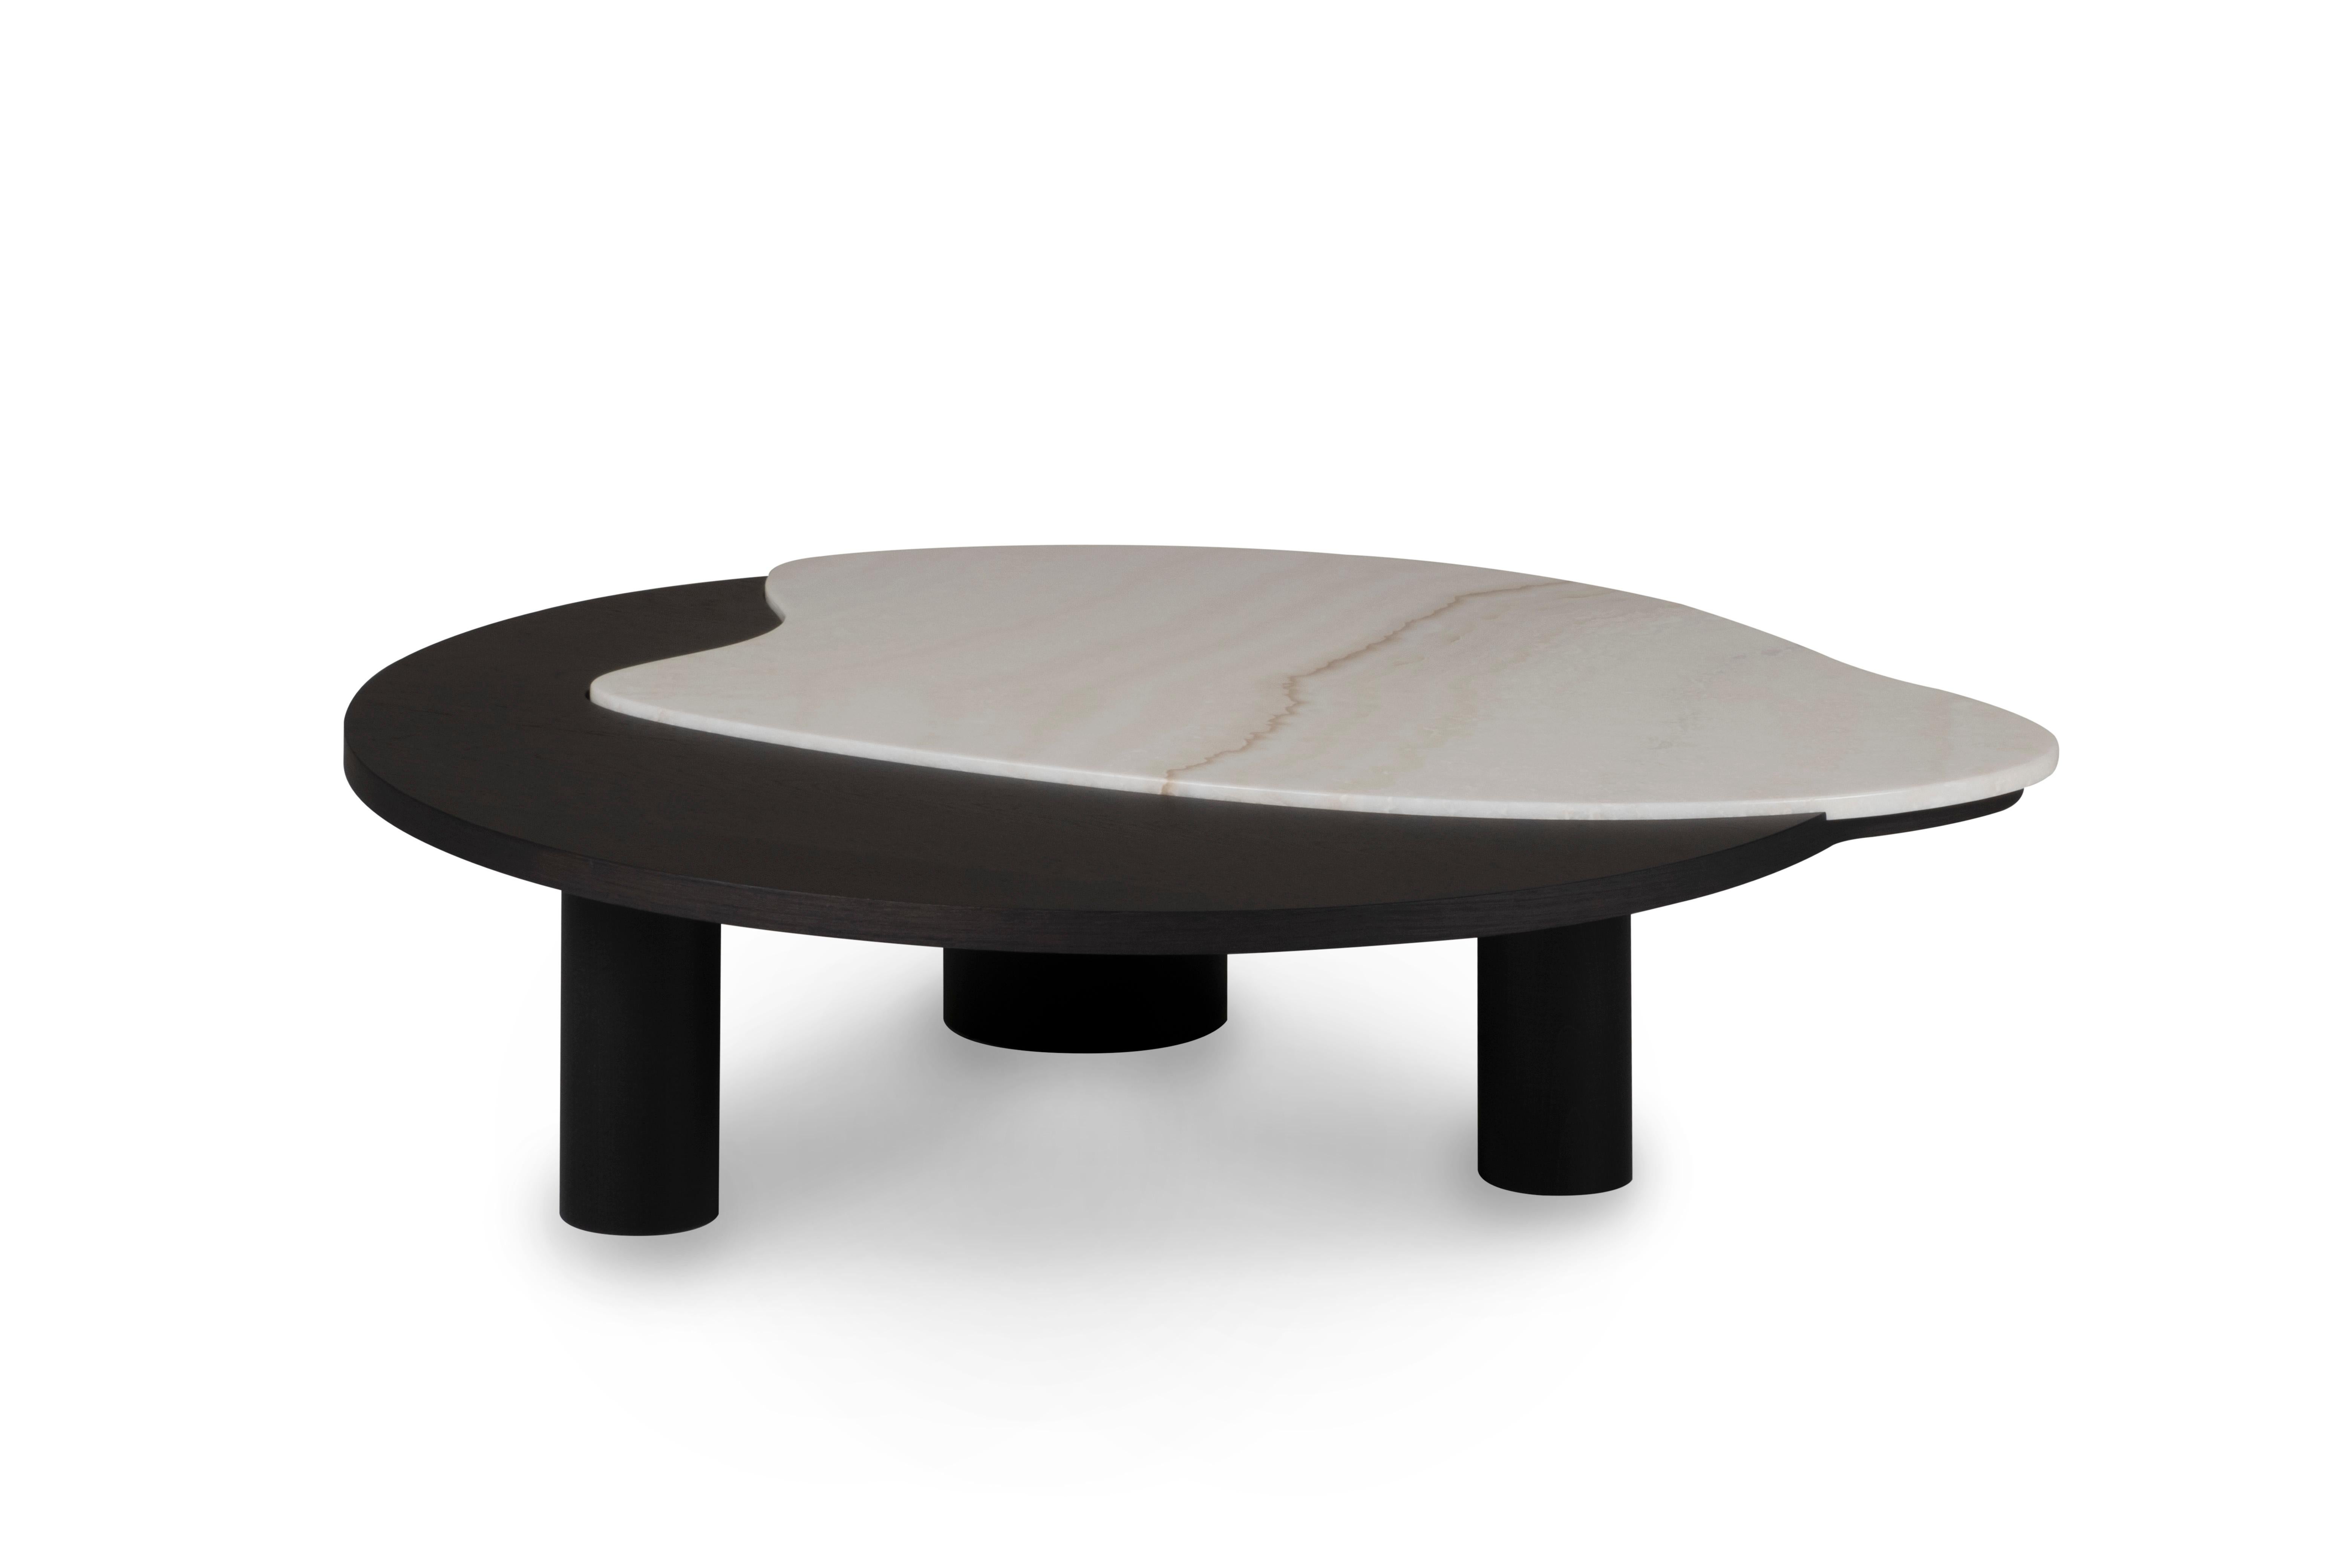 Bordeira Coffee table, Contemporary Collection, Handcrafted in Portugal - Europe by Greenapple.

Designed by Rute Martins for the Contemporary Collection, the Bordeira modern coffee table was designed to add the essence of nature into the interior